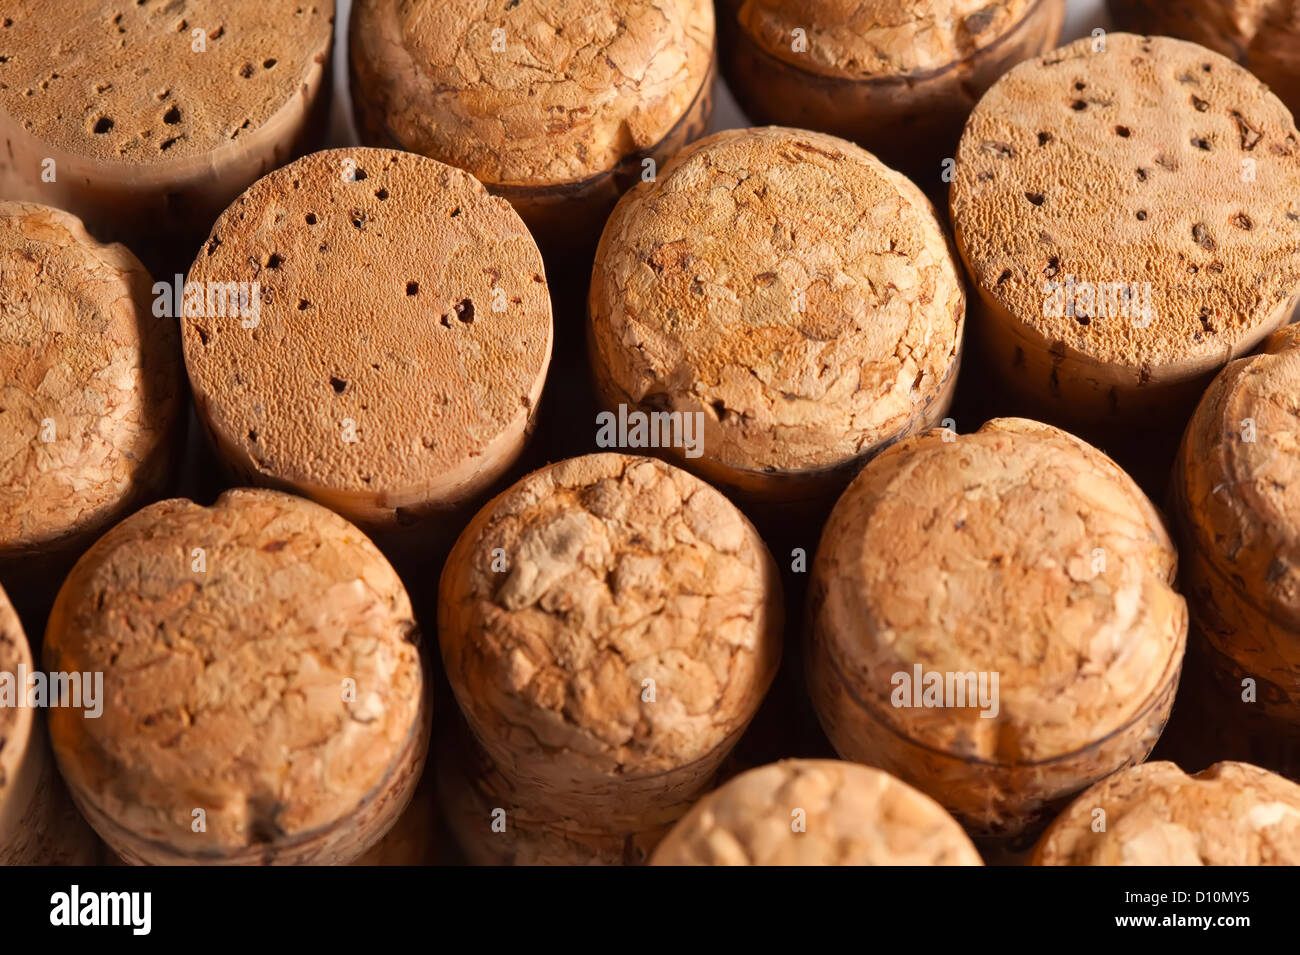 Plugs for wine bottles from natural cork Stock Photo